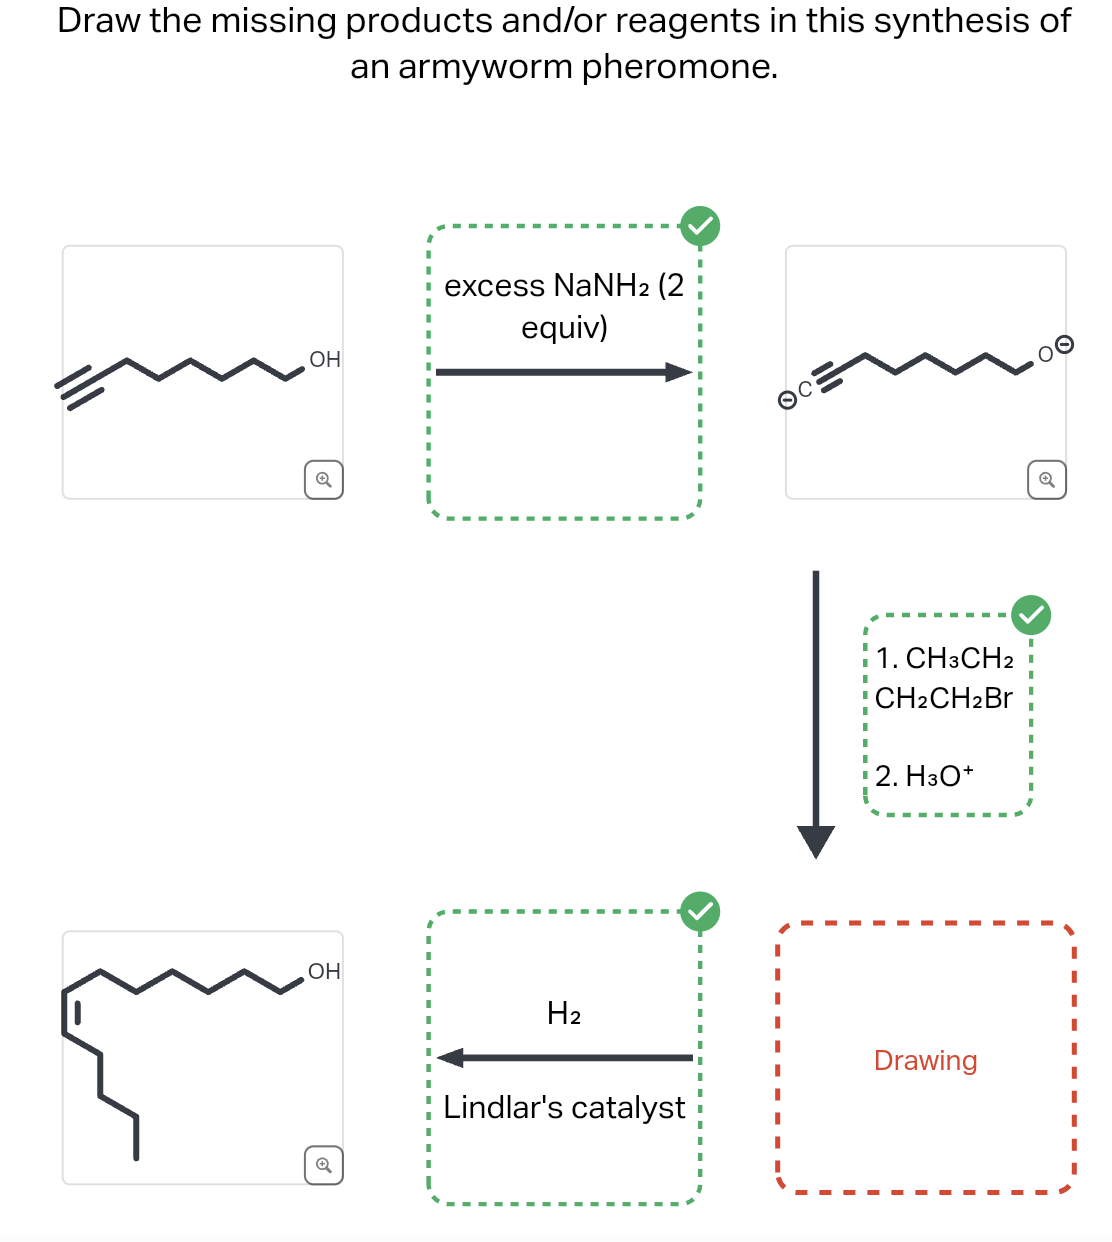 Draw the missing products and/or reagents in this synthesis of
an armyworm pheromone.
OH
Q
OH
excess NaNH2 (2
equiv)
H₂
Lindlar's catalyst
1. CH3CH2
CH2CH2Br
2. H3O+
Drawing
Q